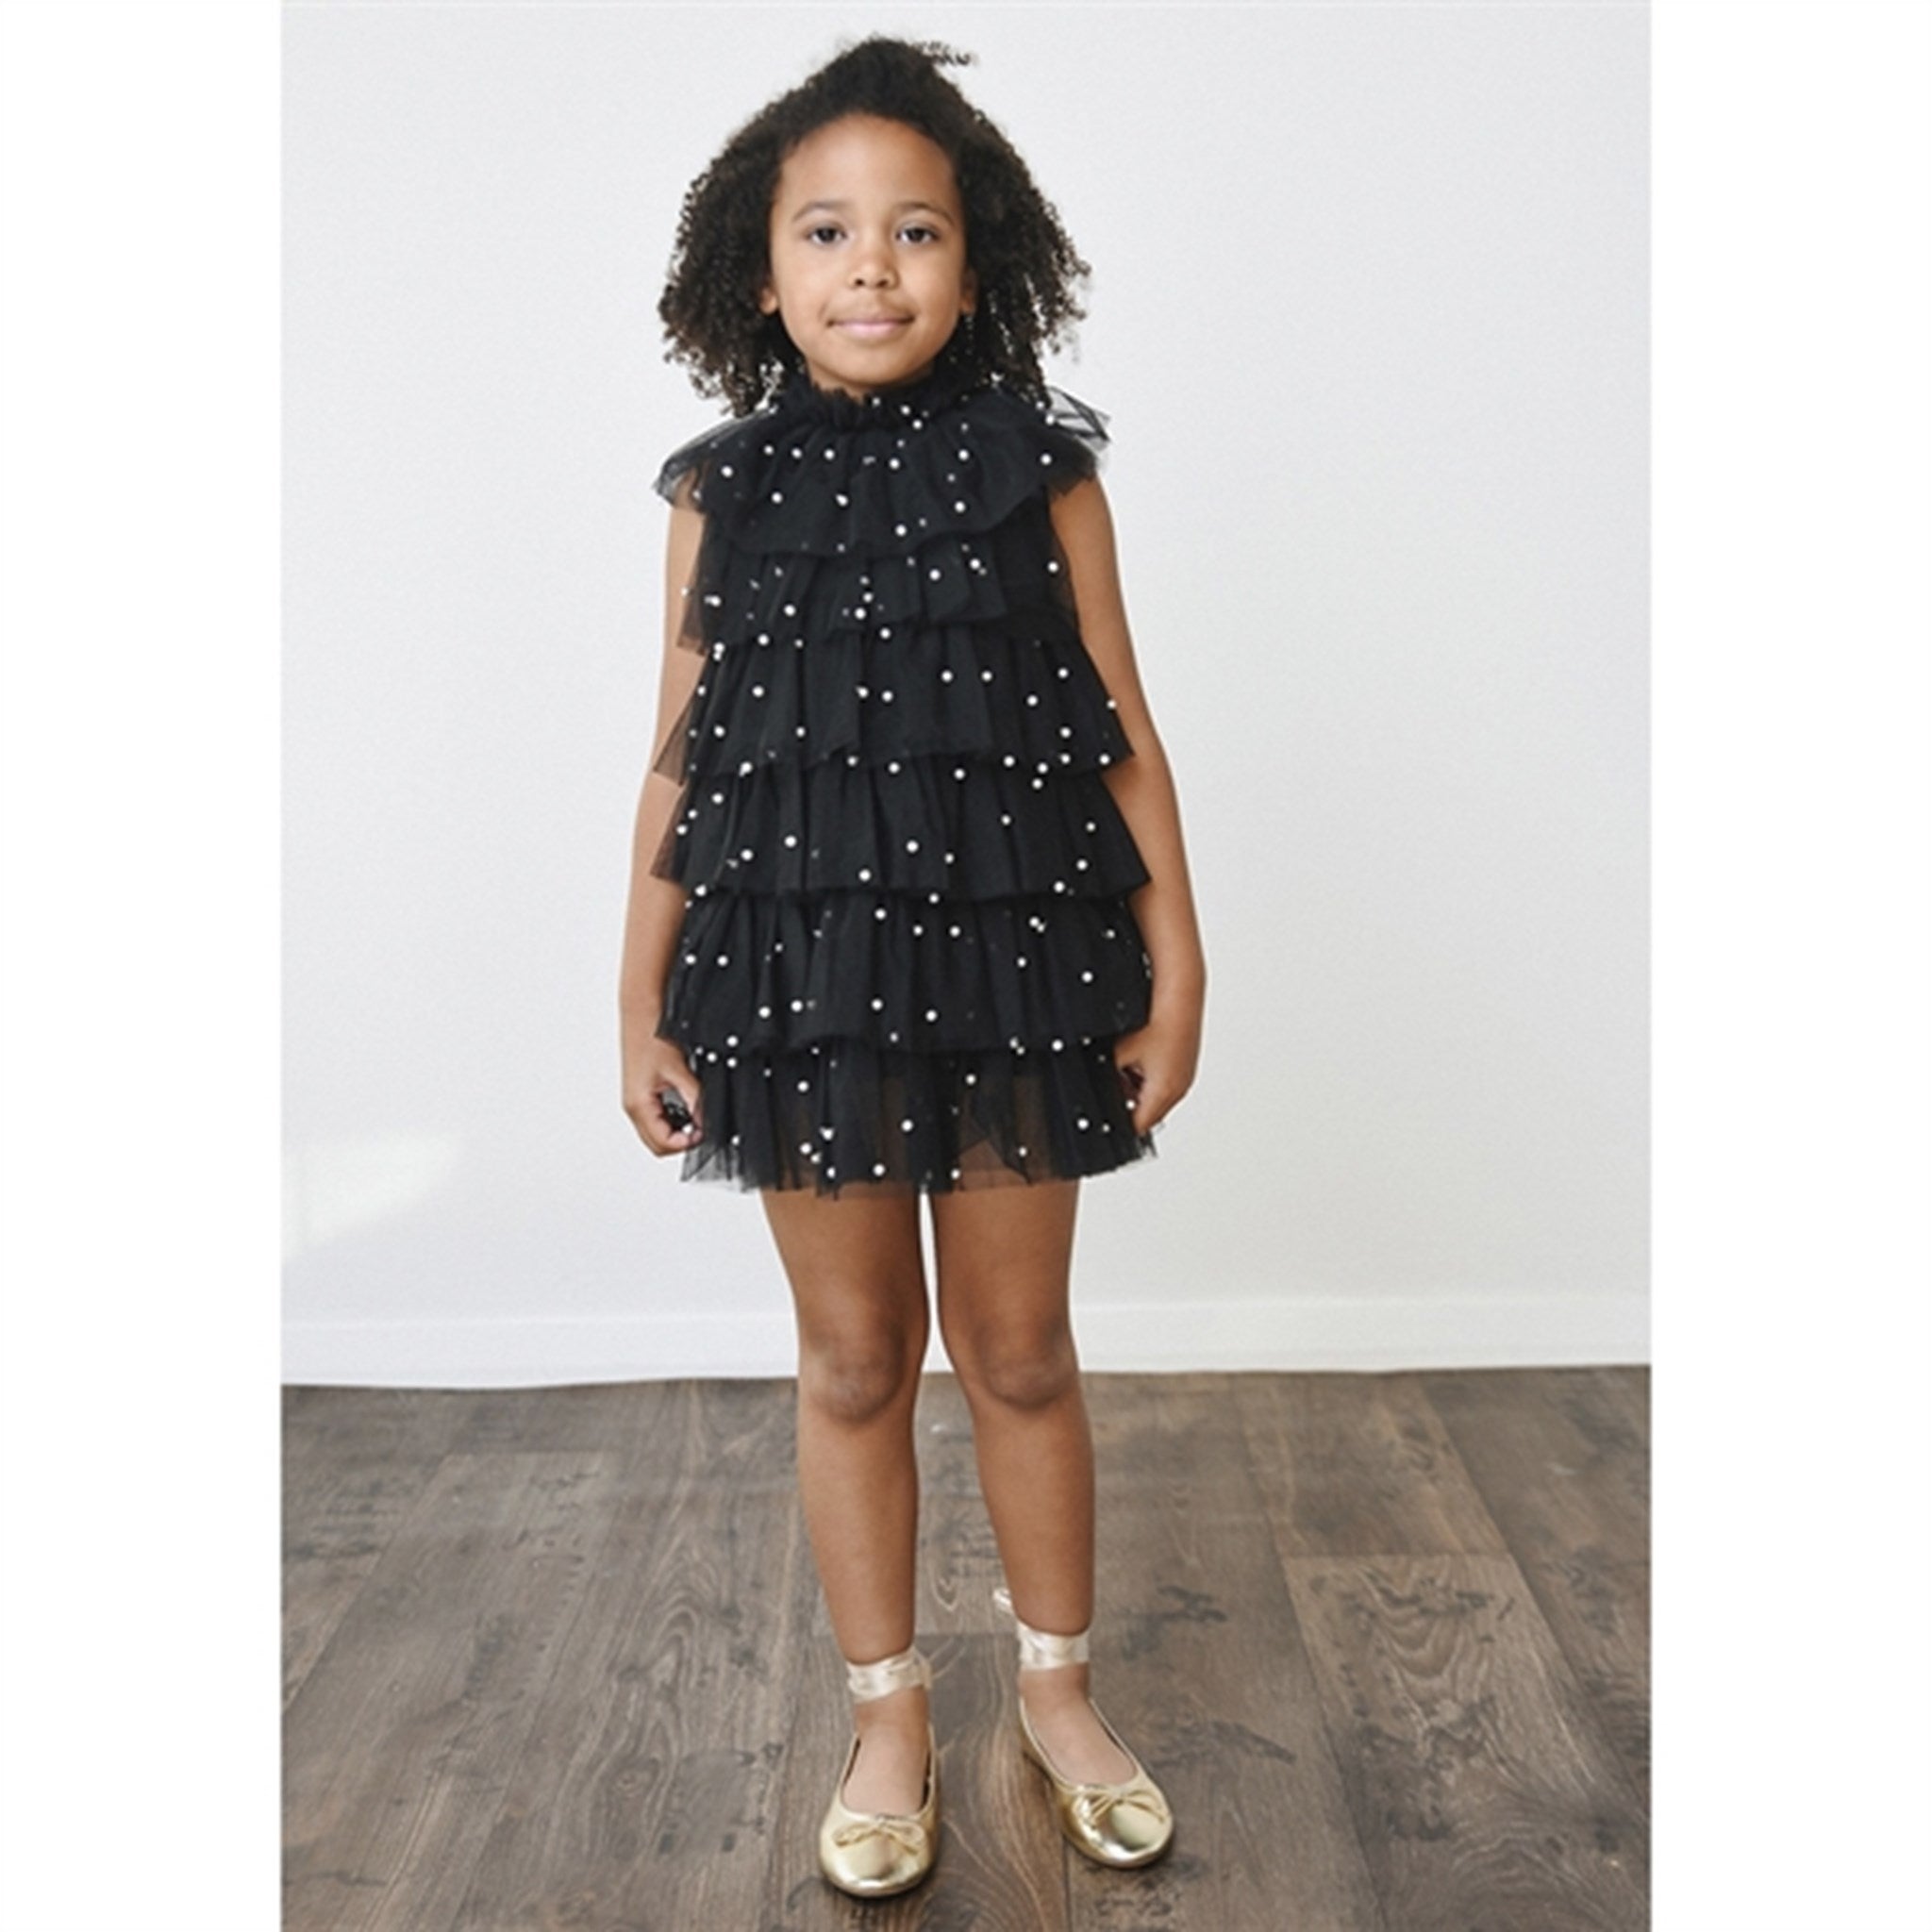 Dolly by Le Petit Tom Pearl Tutully Tiered Tulle Tuttu Dress Black 3